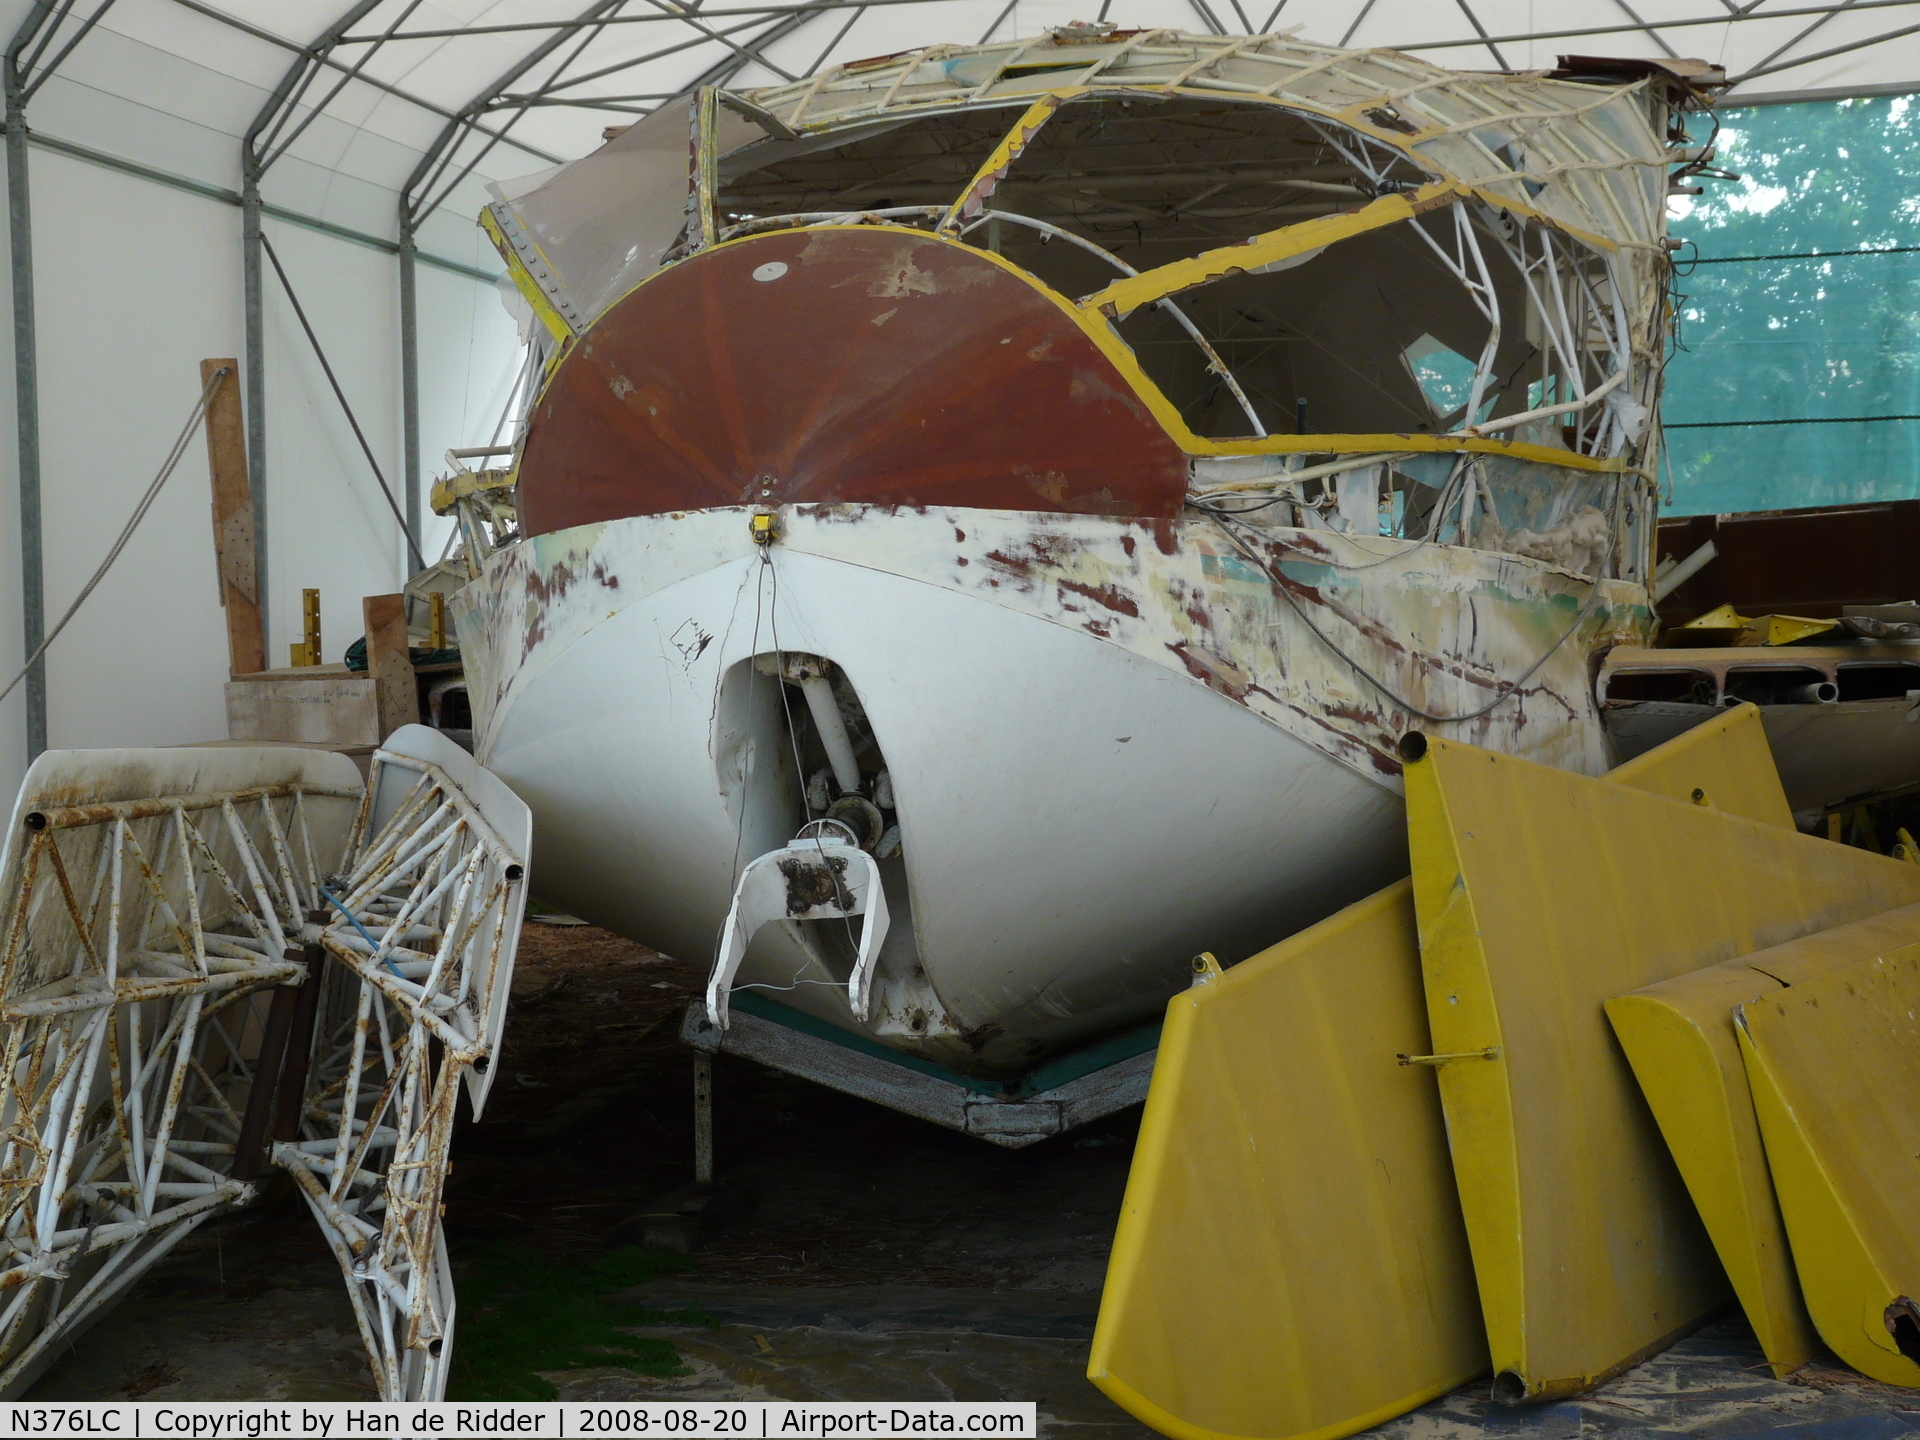 N376LC, 1994 Wilson Dean EXPLORER II C/N 002, Under restoration at the Musée historique de l'hydraviation (Museum of sea plane and flying boat history) located at Biscarrosse, Landes, France.